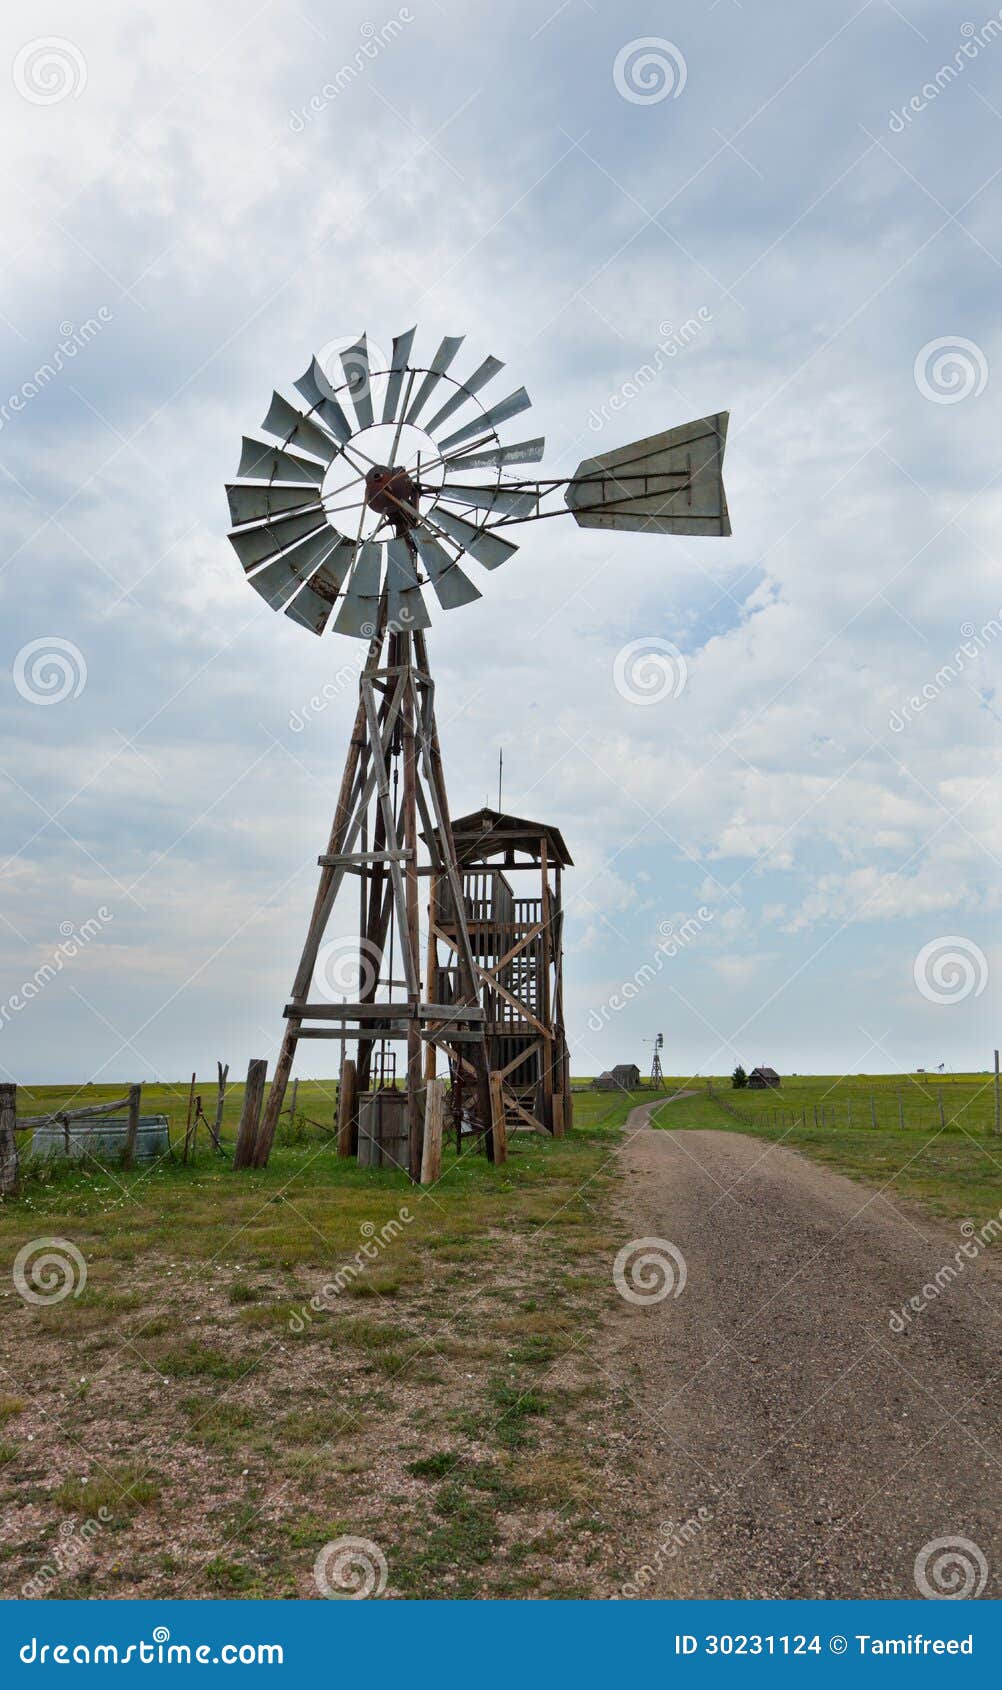 An old western windmill, used to pump water out of a well, made of 